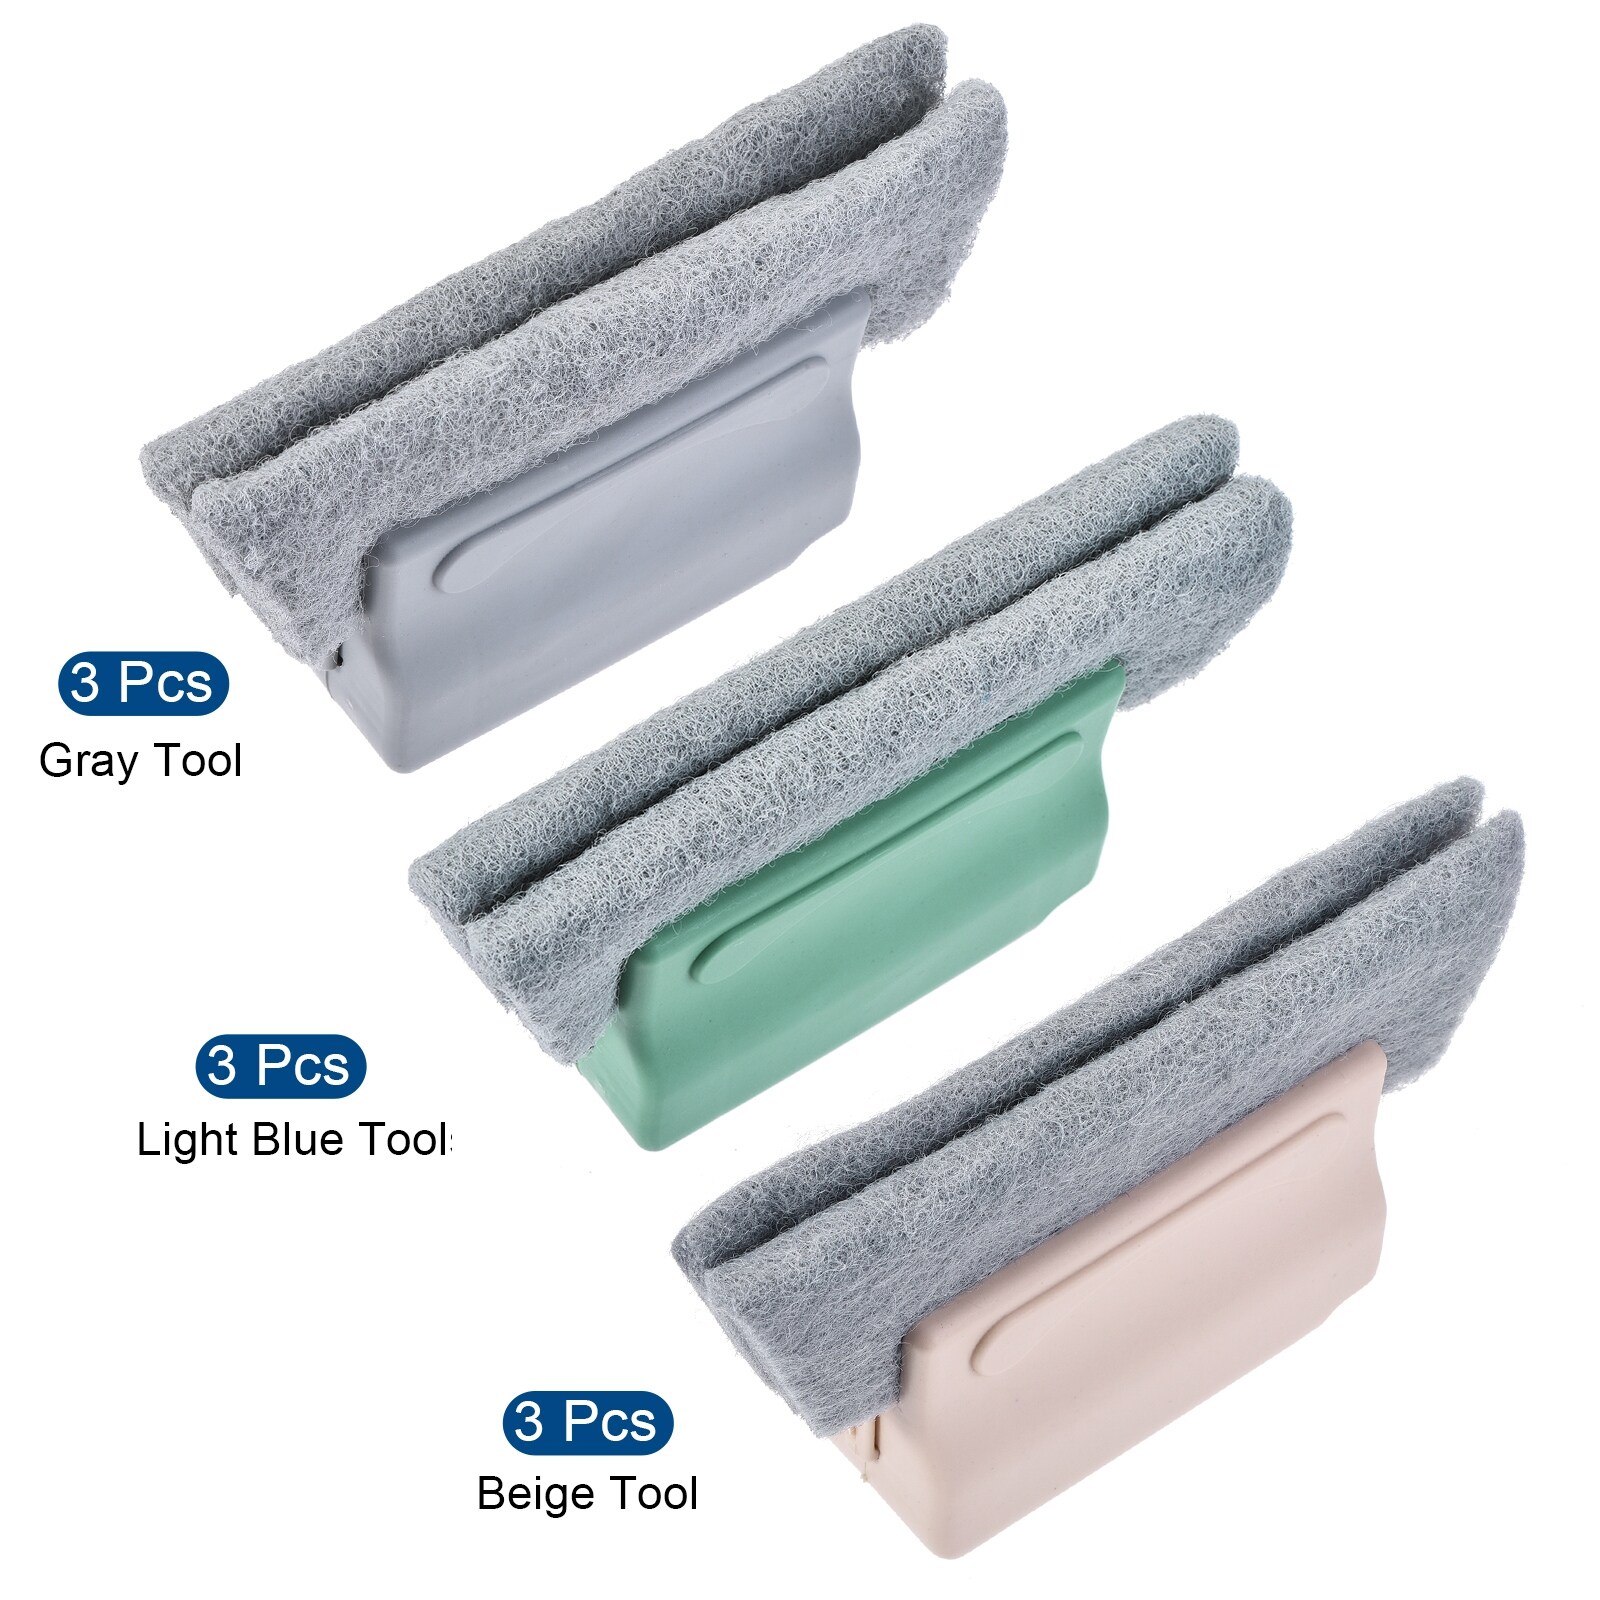 https://ak1.ostkcdn.com/images/products/is/images/direct/6d9a2df0377e33c3aaddd4991c58a40f995a6475/9Pcs-Window-Track-Groove-Gap-Cleaning-Brush-Tools-Hand-held-Gray-Beige-Green.jpg